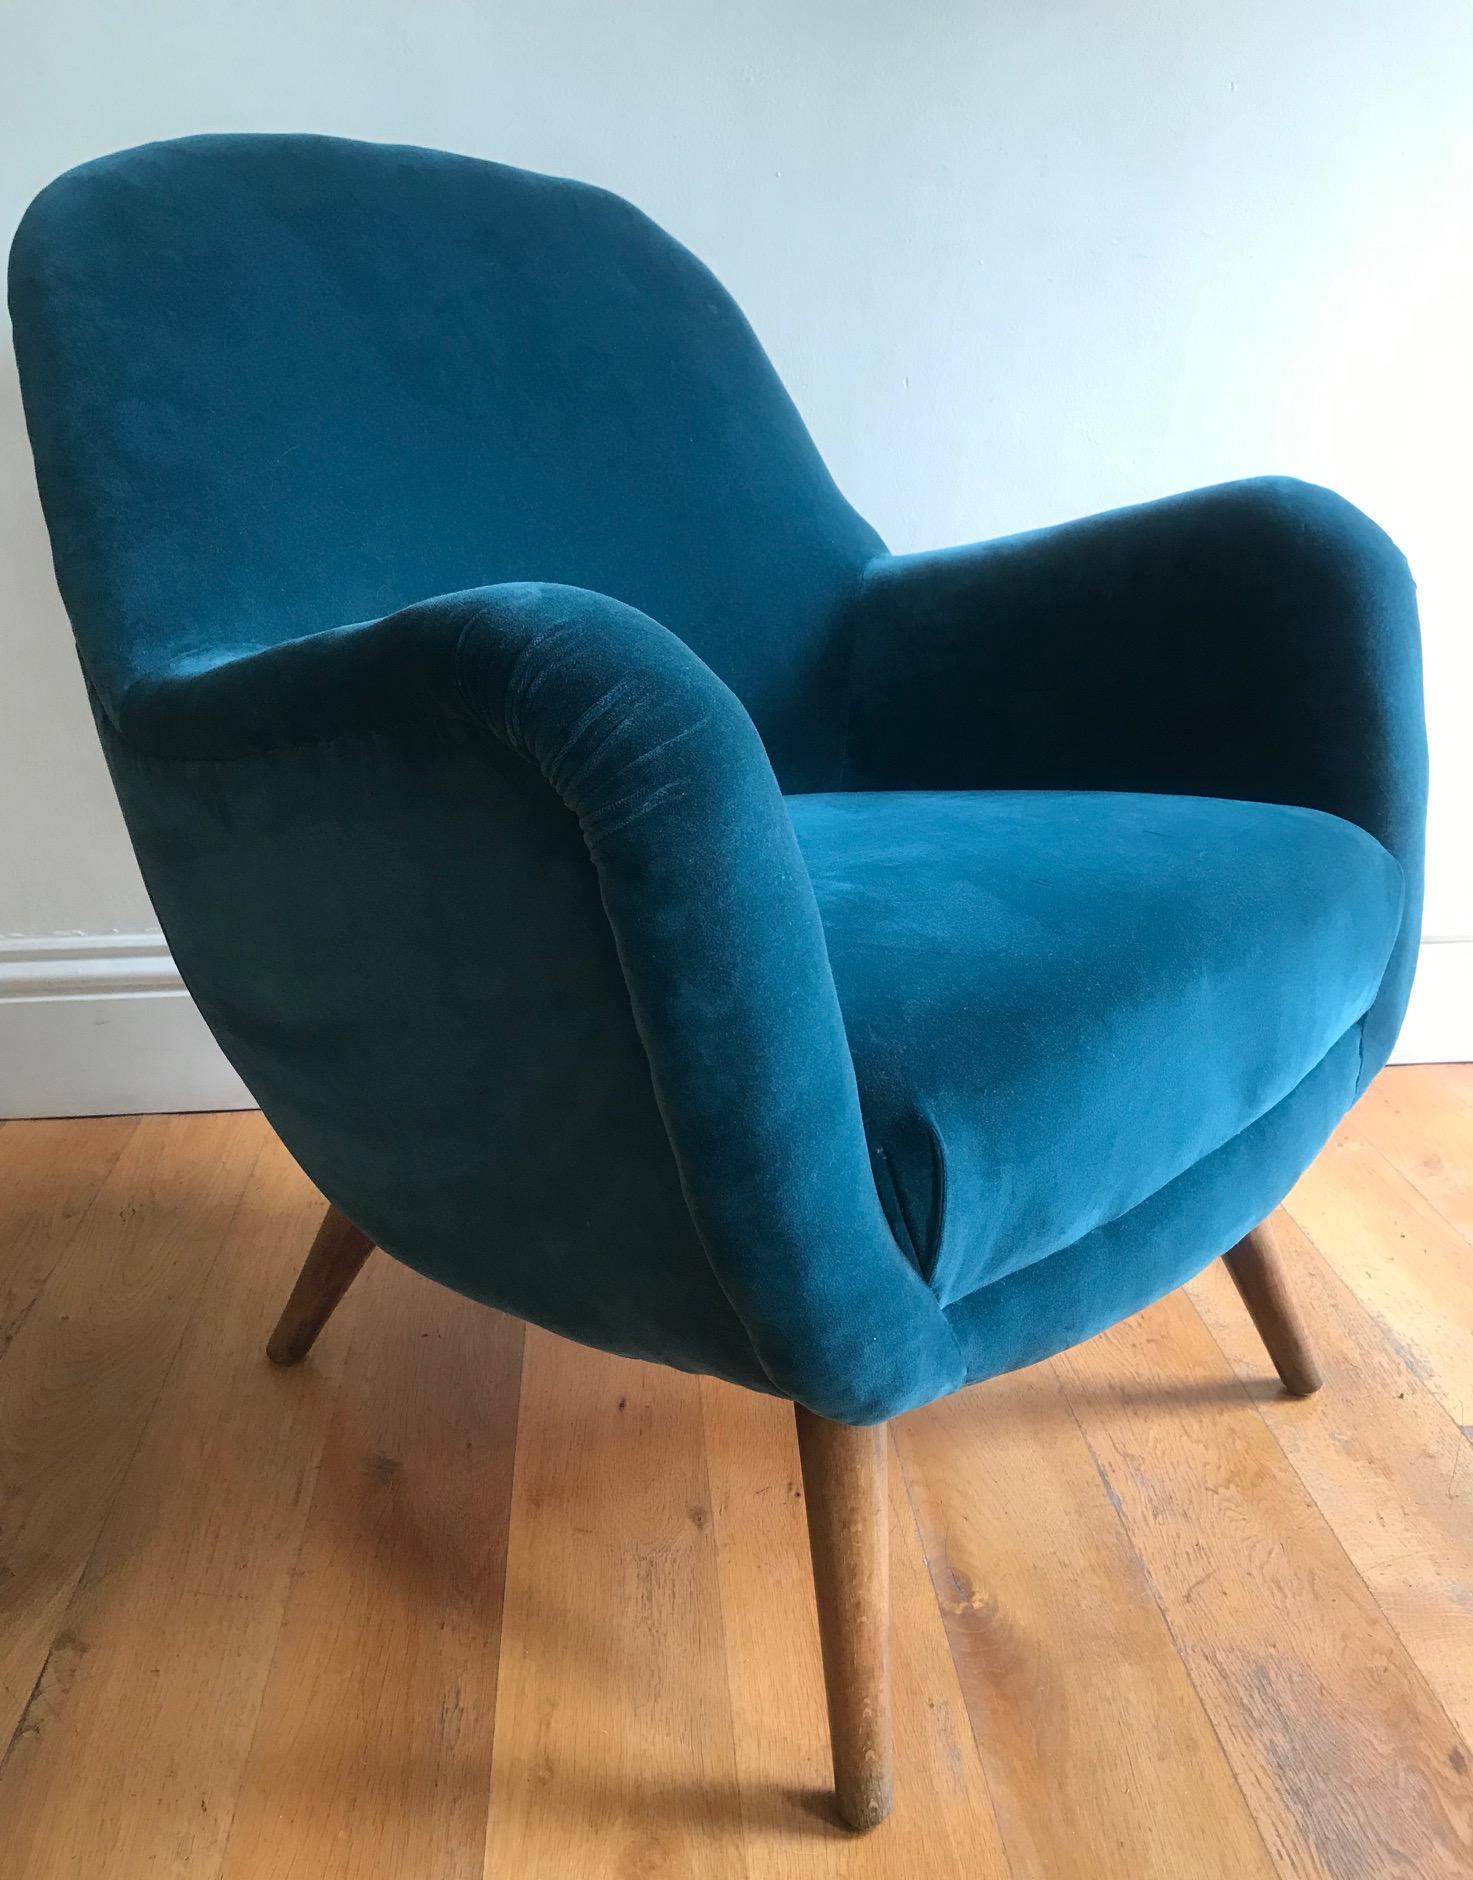 An original small 1950s Danish armchair reupholstered in teal colored velvet, resting on four cone shaped beech legs.